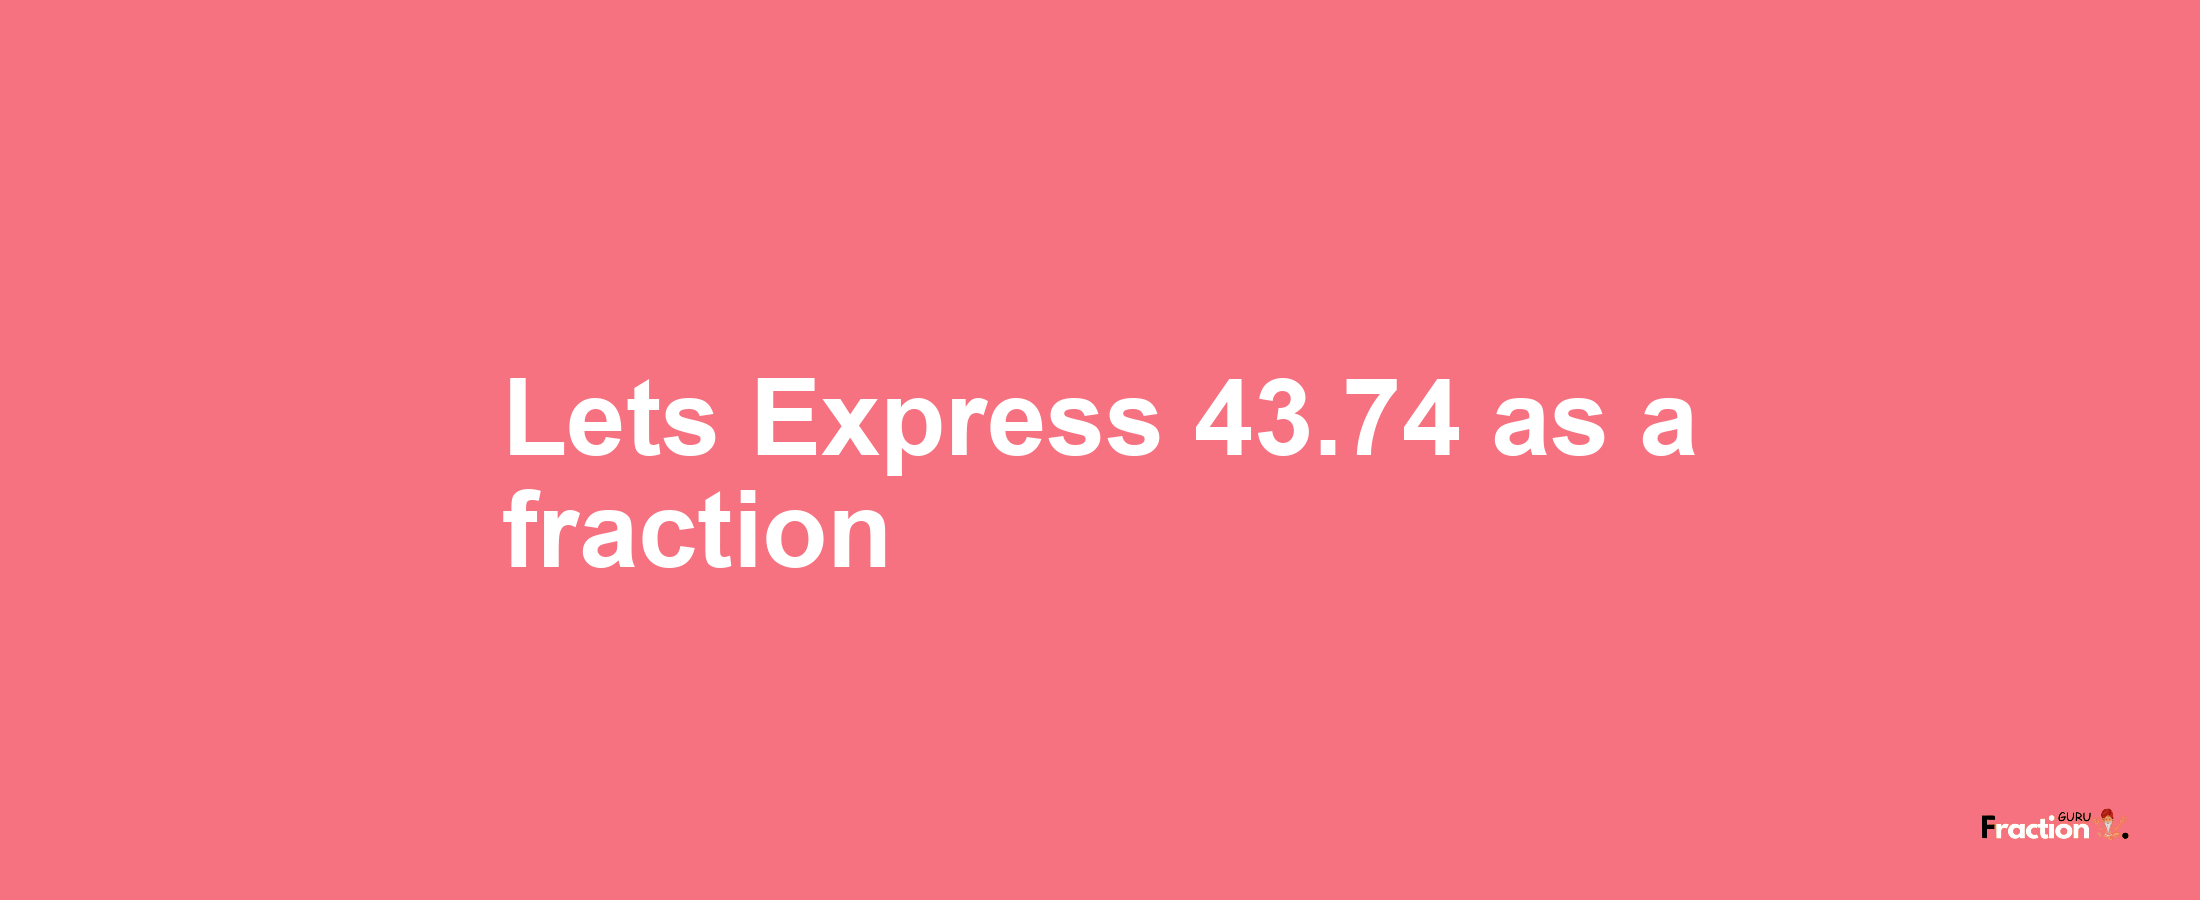 Lets Express 43.74 as afraction